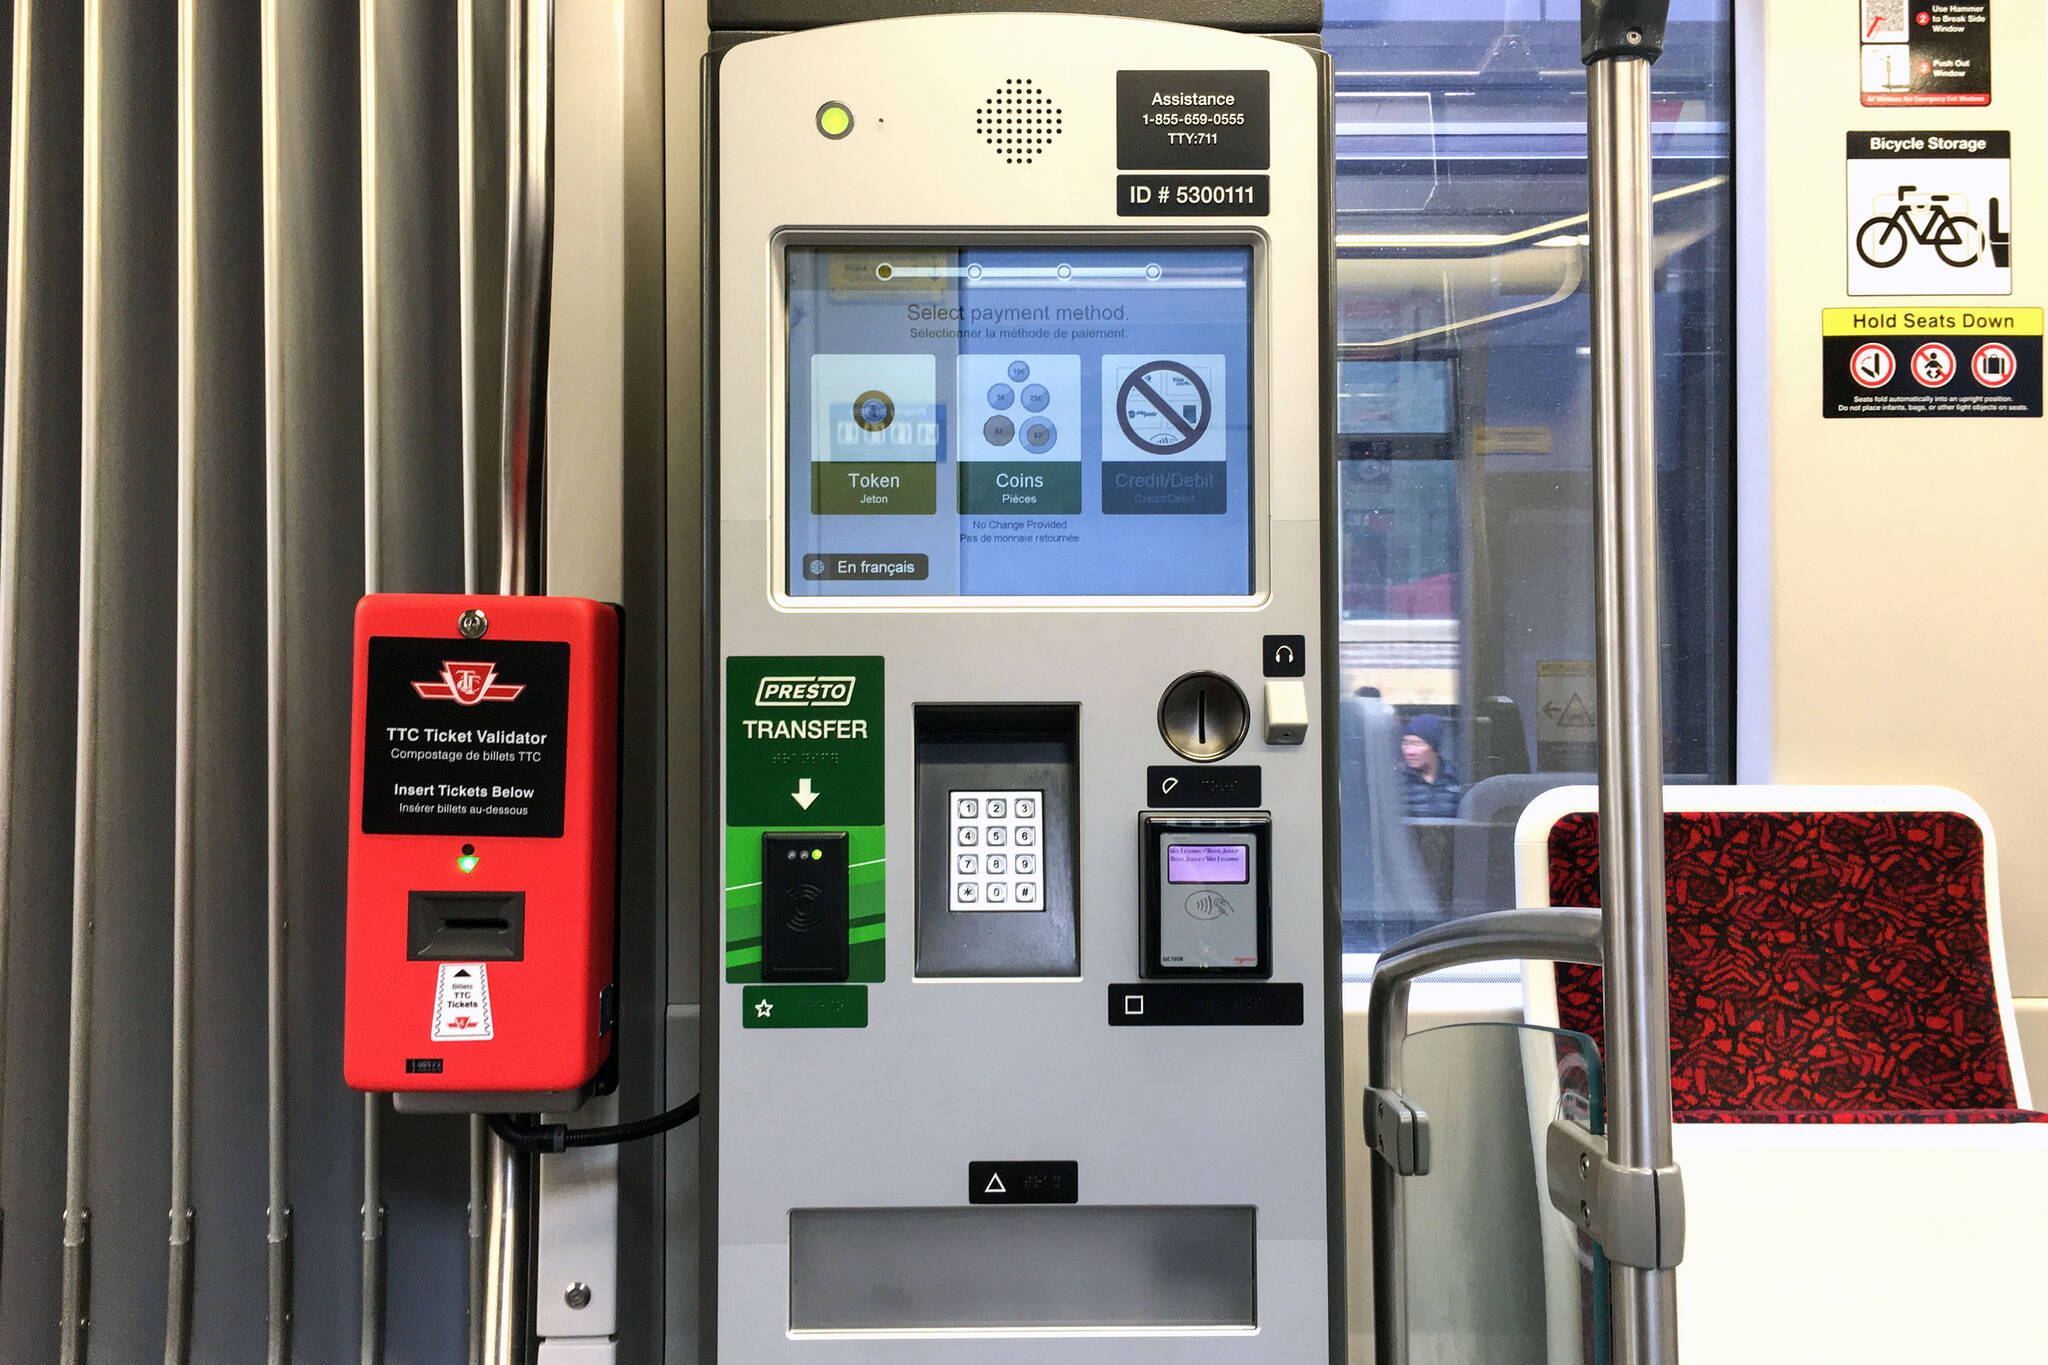 The TTC is having trouble making people pay for rides